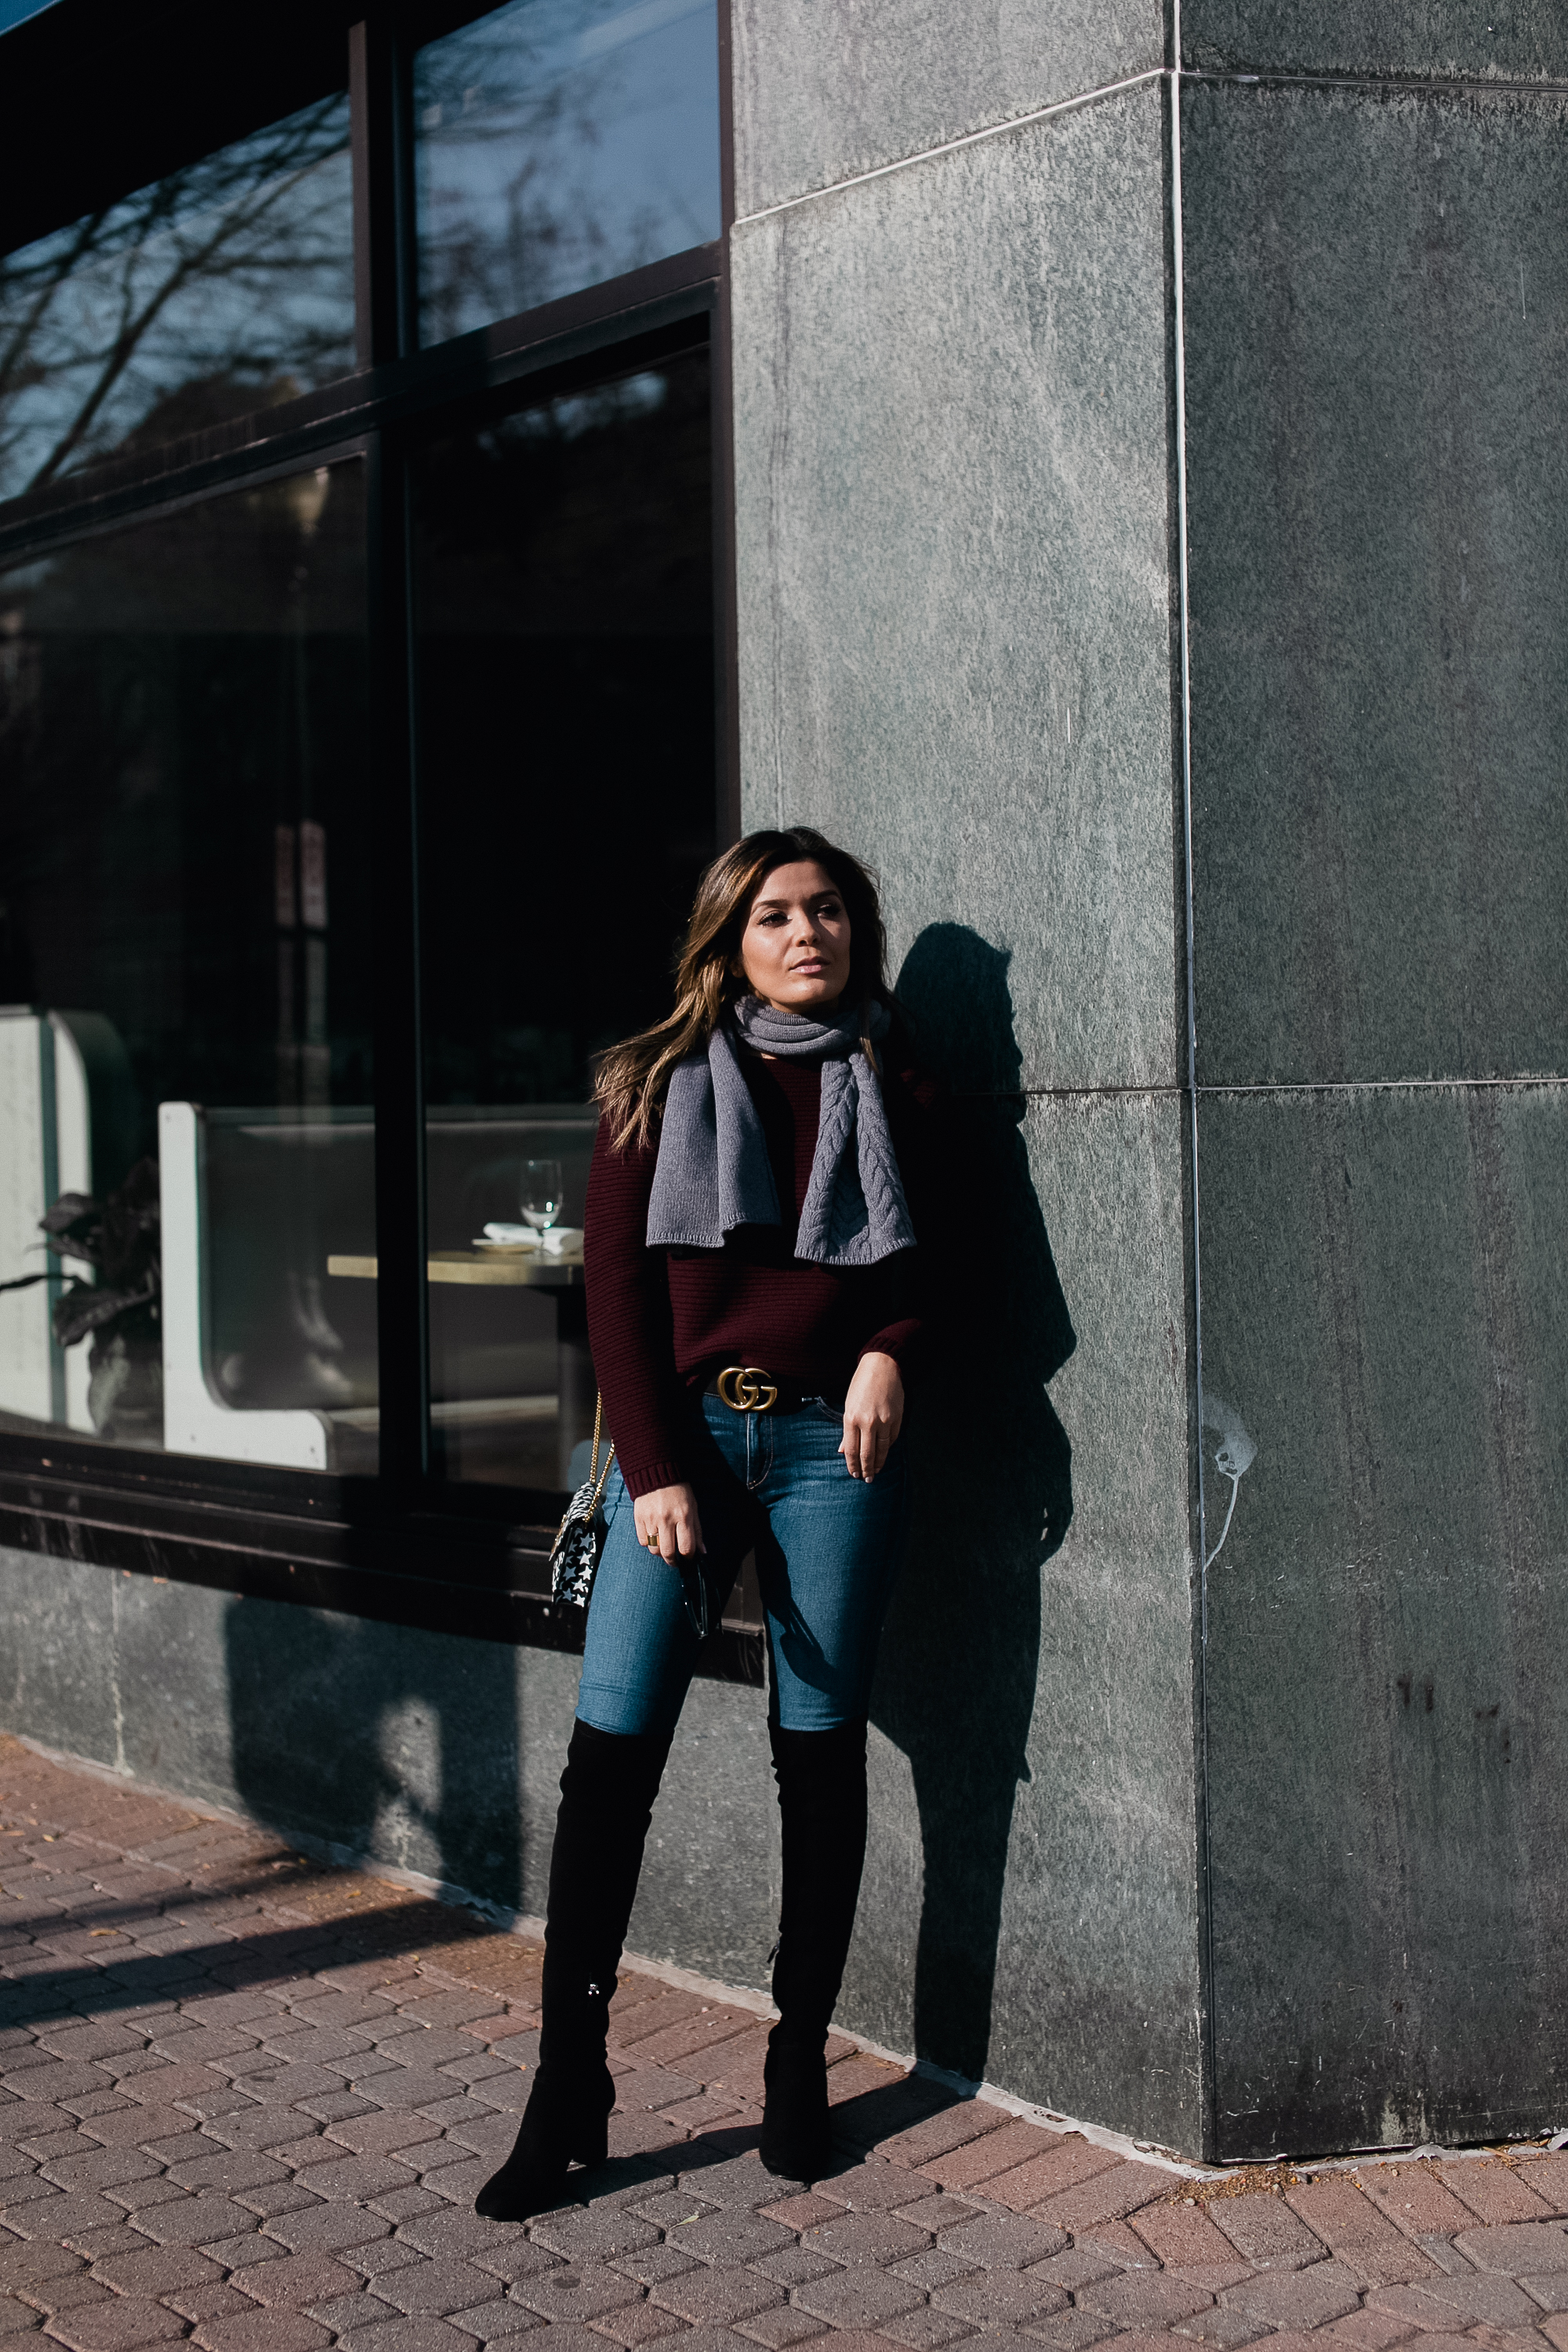 Blogger Sara Azani of Style MBA, a petite brunette woman with blonde highlights, poses outside and wears a Lafayette 148 NY cashmere sweater, Lafayette 148 NY merino cable scarf, and Lafayette 148 NY OTK or over-the-knee boots, along with Céline sunglasses, and a black Gucci belt as part of her burgundy and grey outfit.